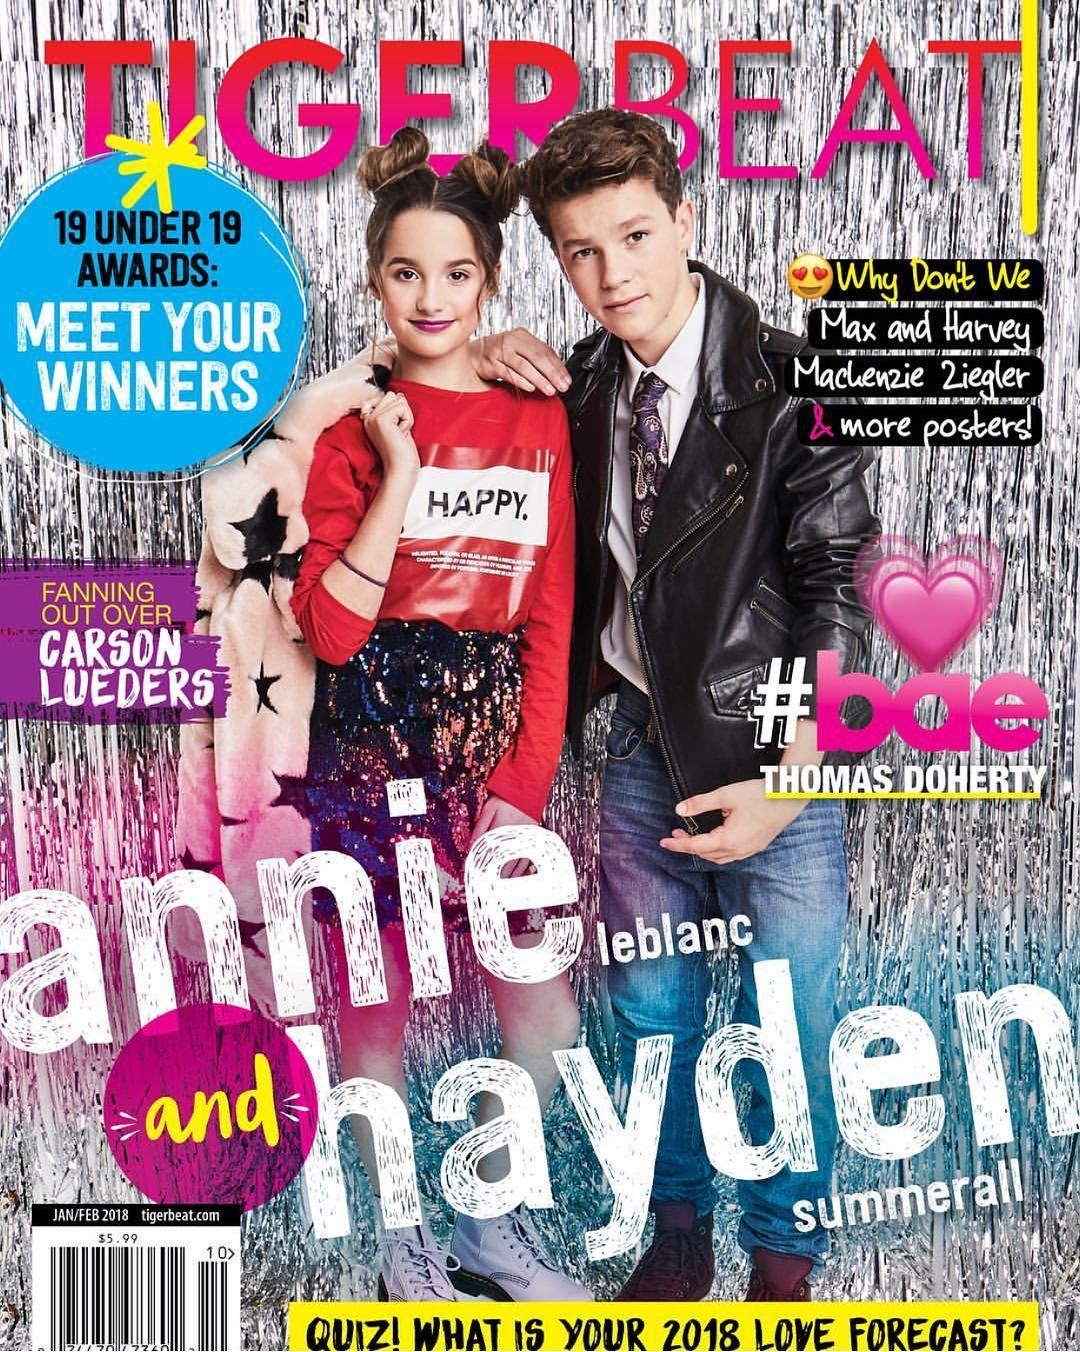 Image result for hayden summerall and annie leblanc on a tiger beat